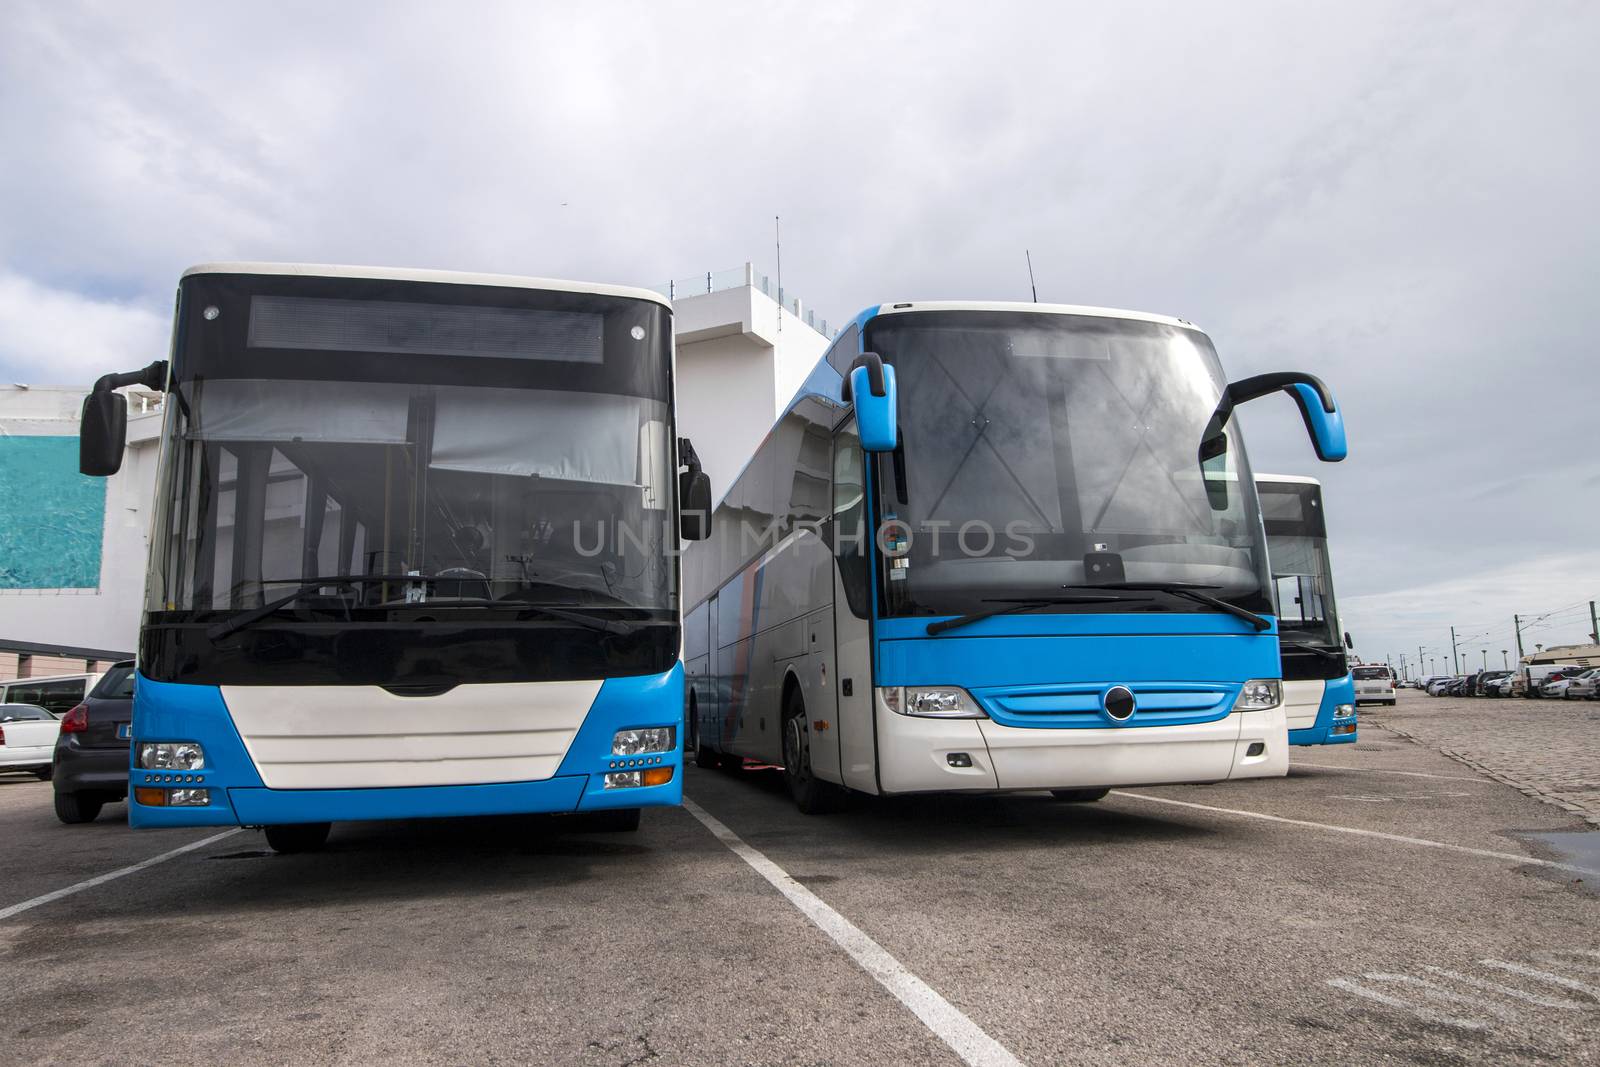 View of several blue and white Buses parked in the city.